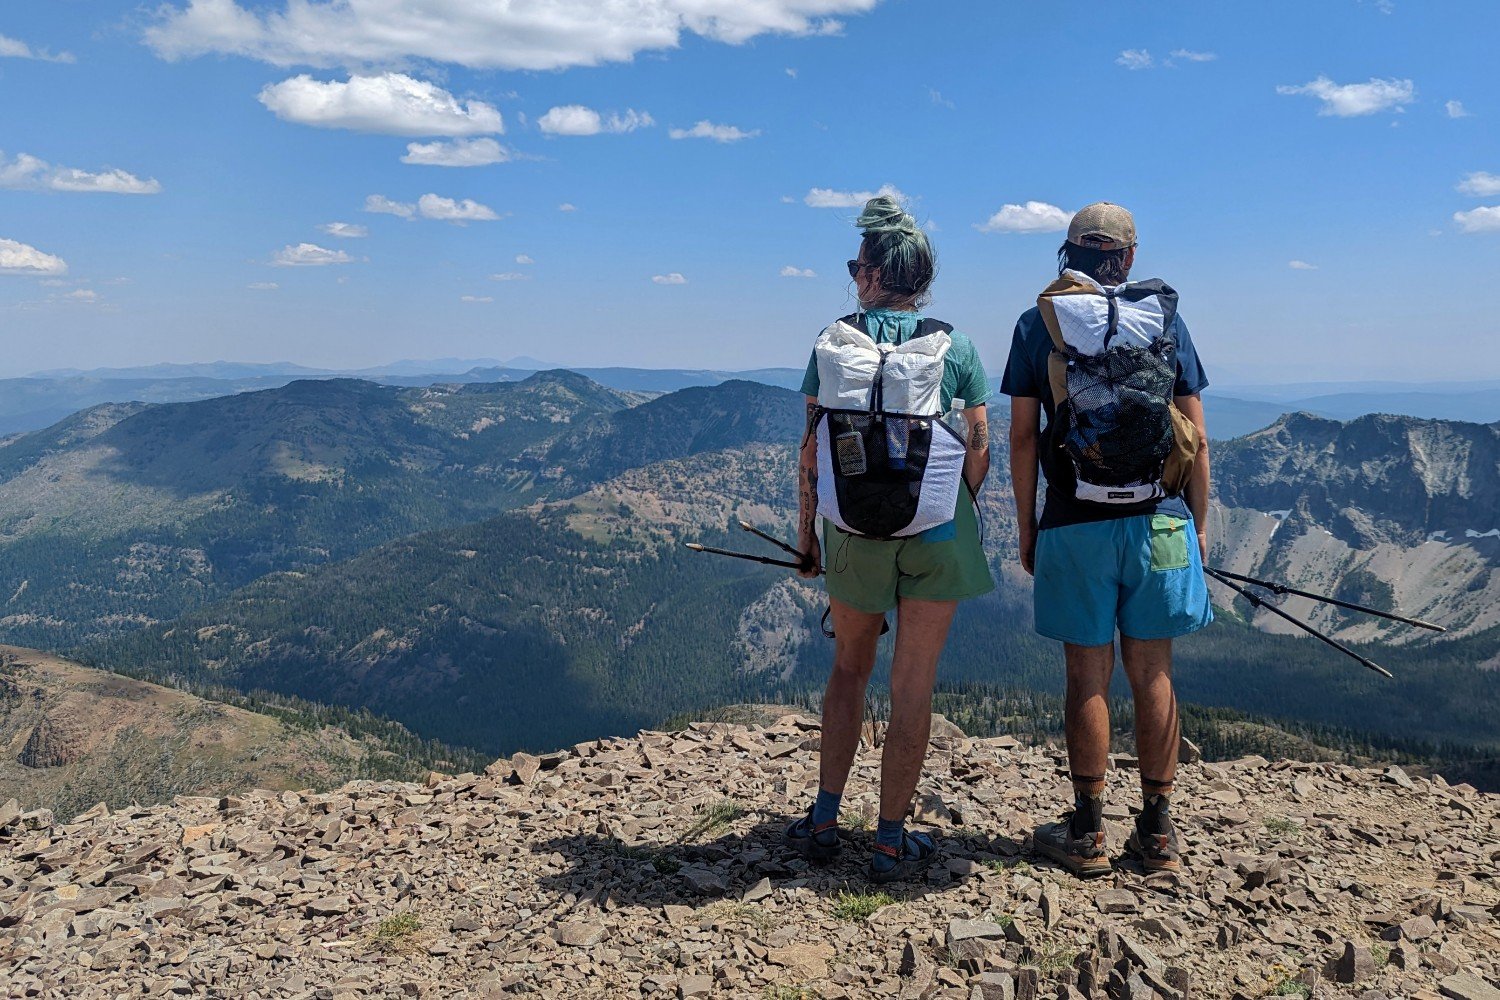 Two hikers with ultralight backpacks standing at the peak of a mountain looking out at more distant mountain peaks